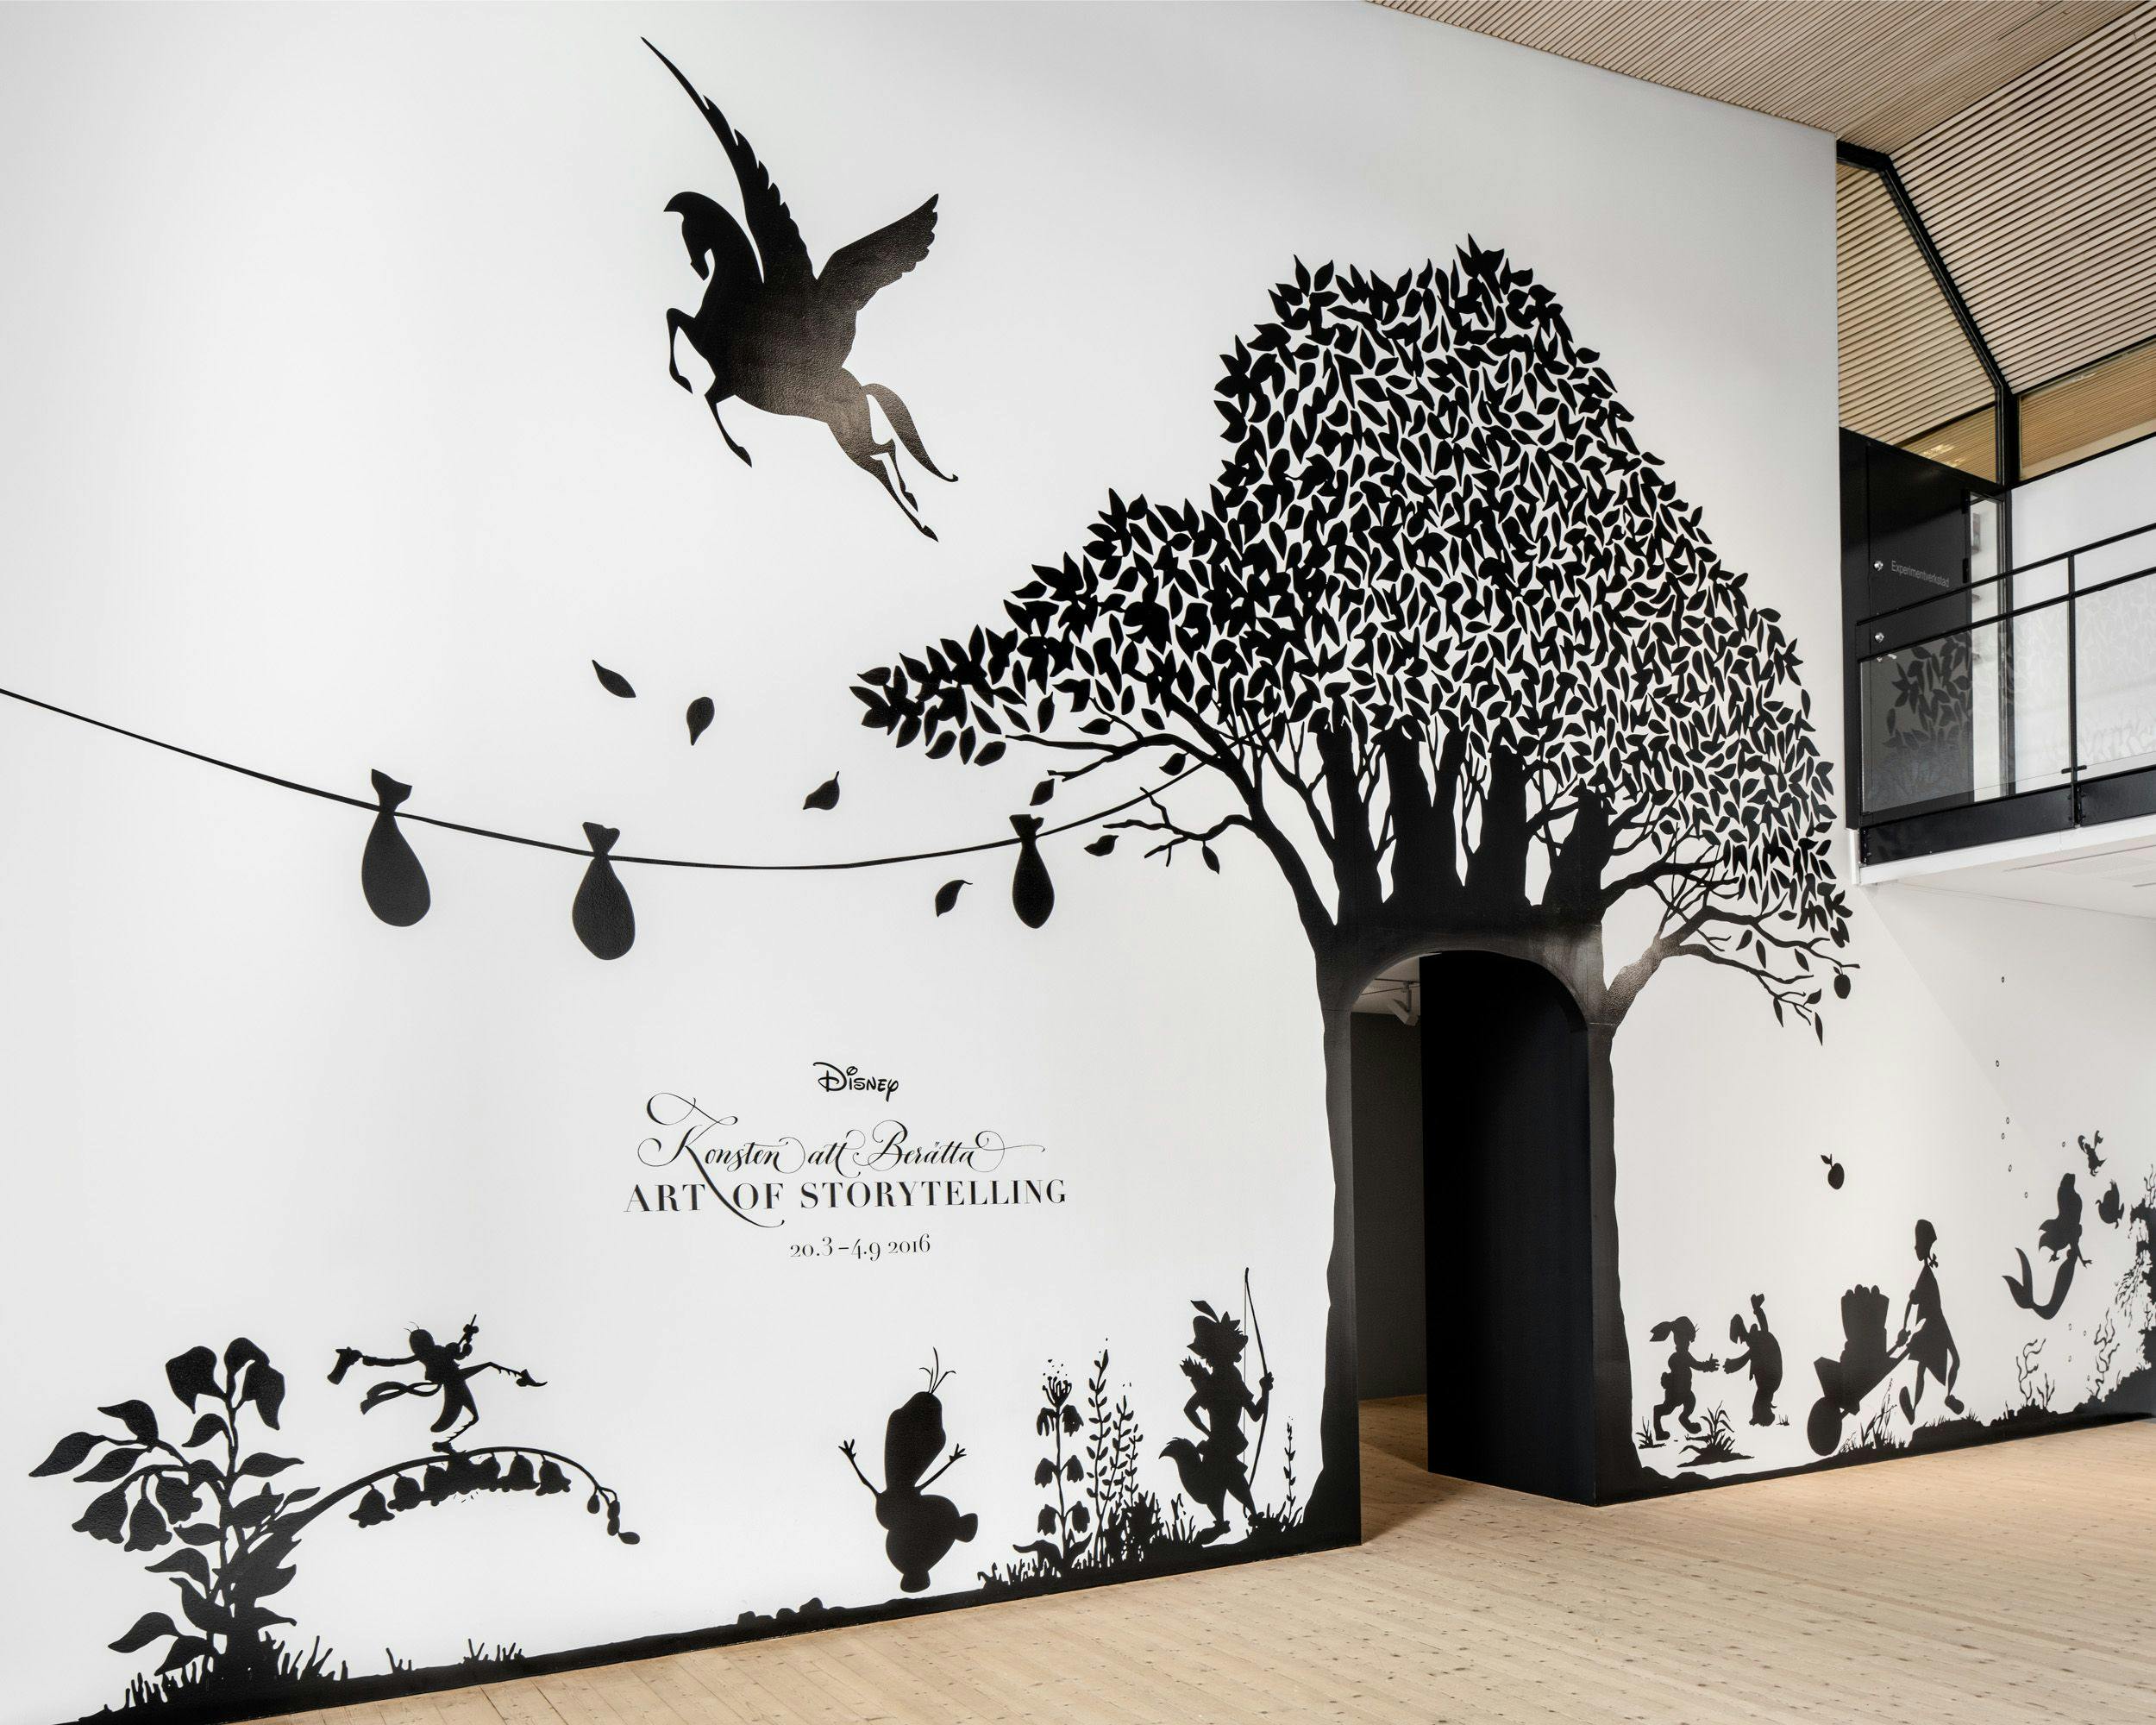 The entrance to the exhibition, with a large mural of silhouettes of famous Disney characters